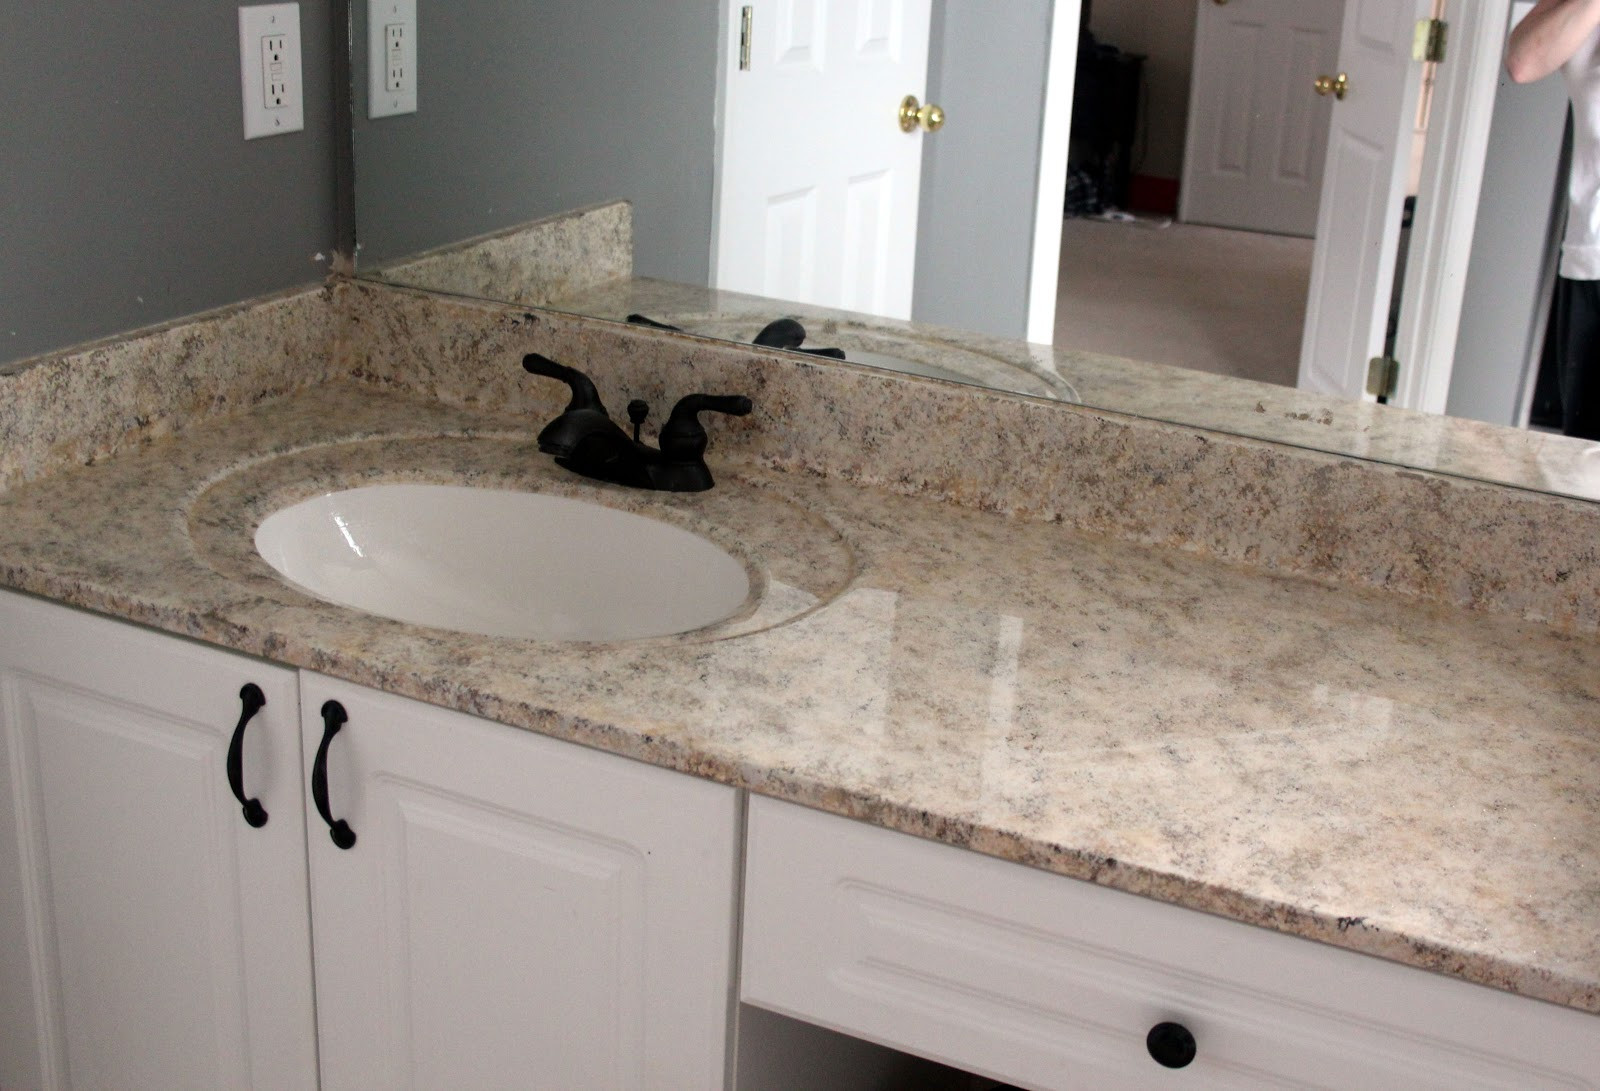 Painted Bathroom Countertop
 My EnRoute life Painted faux granite countertops Master